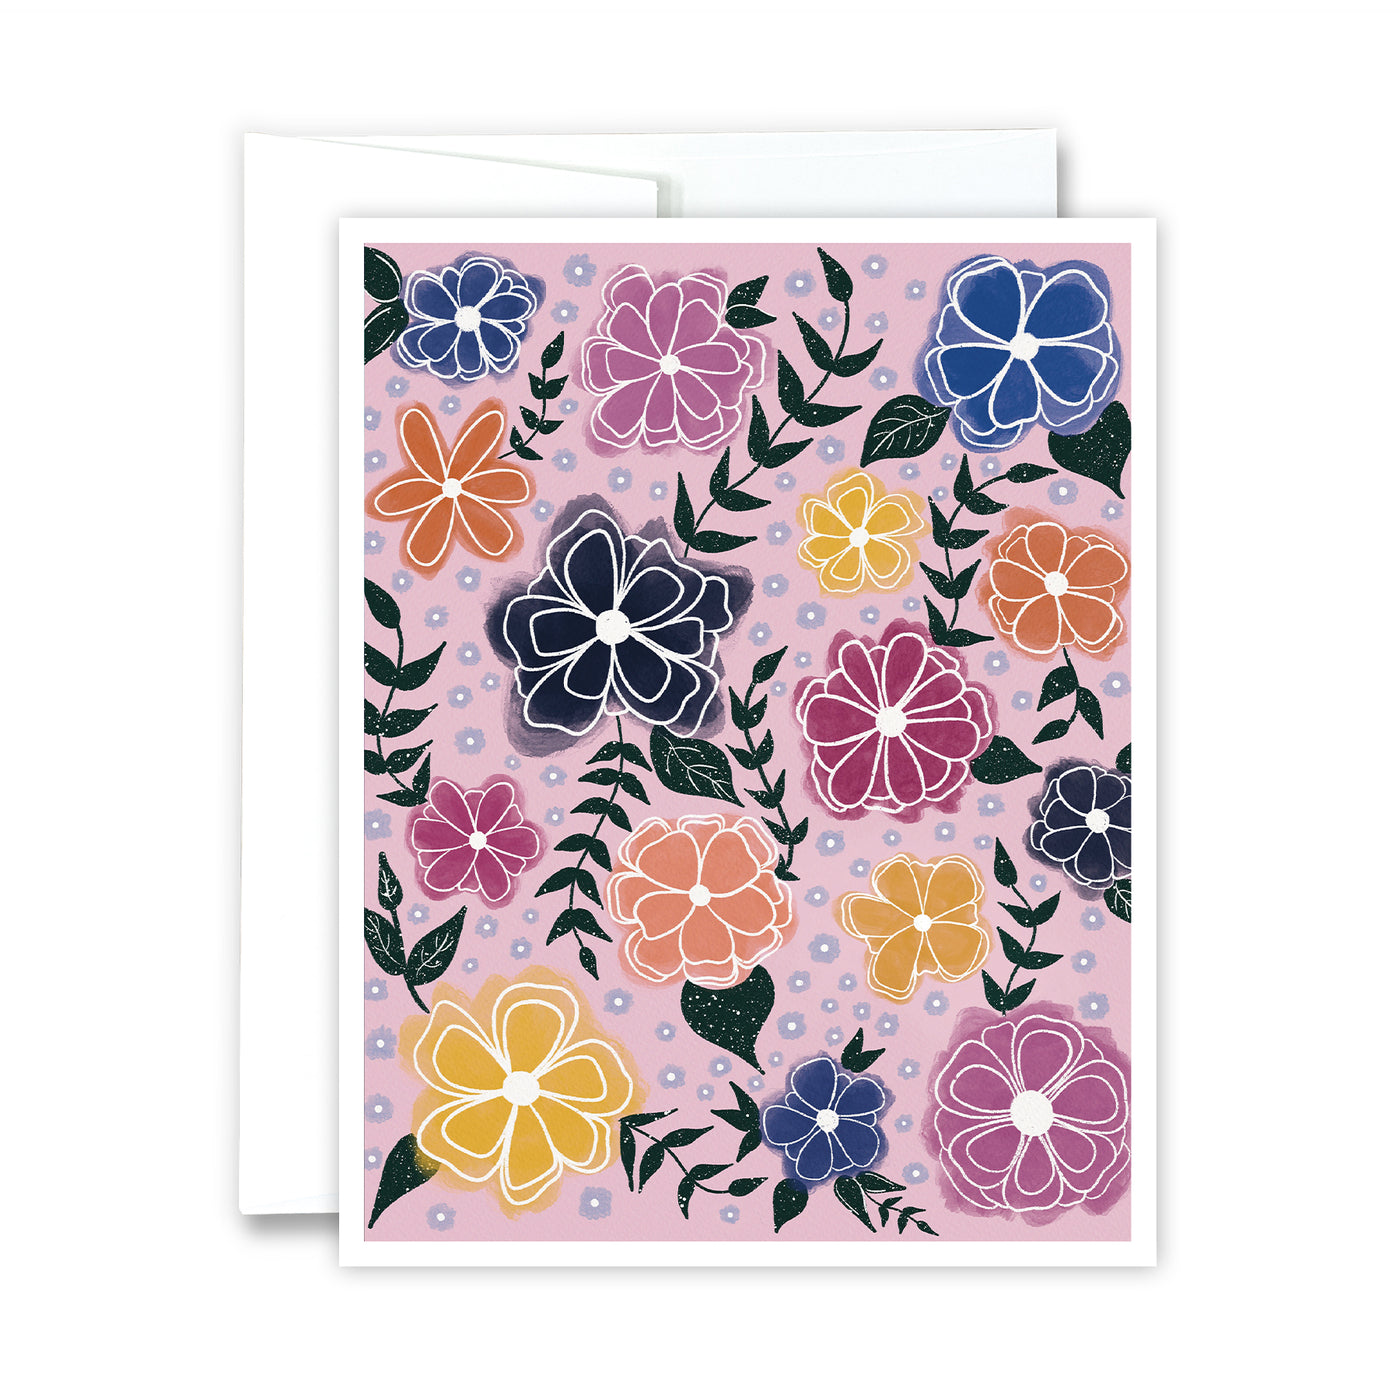 Whimsical Fun Florals Greeting Card